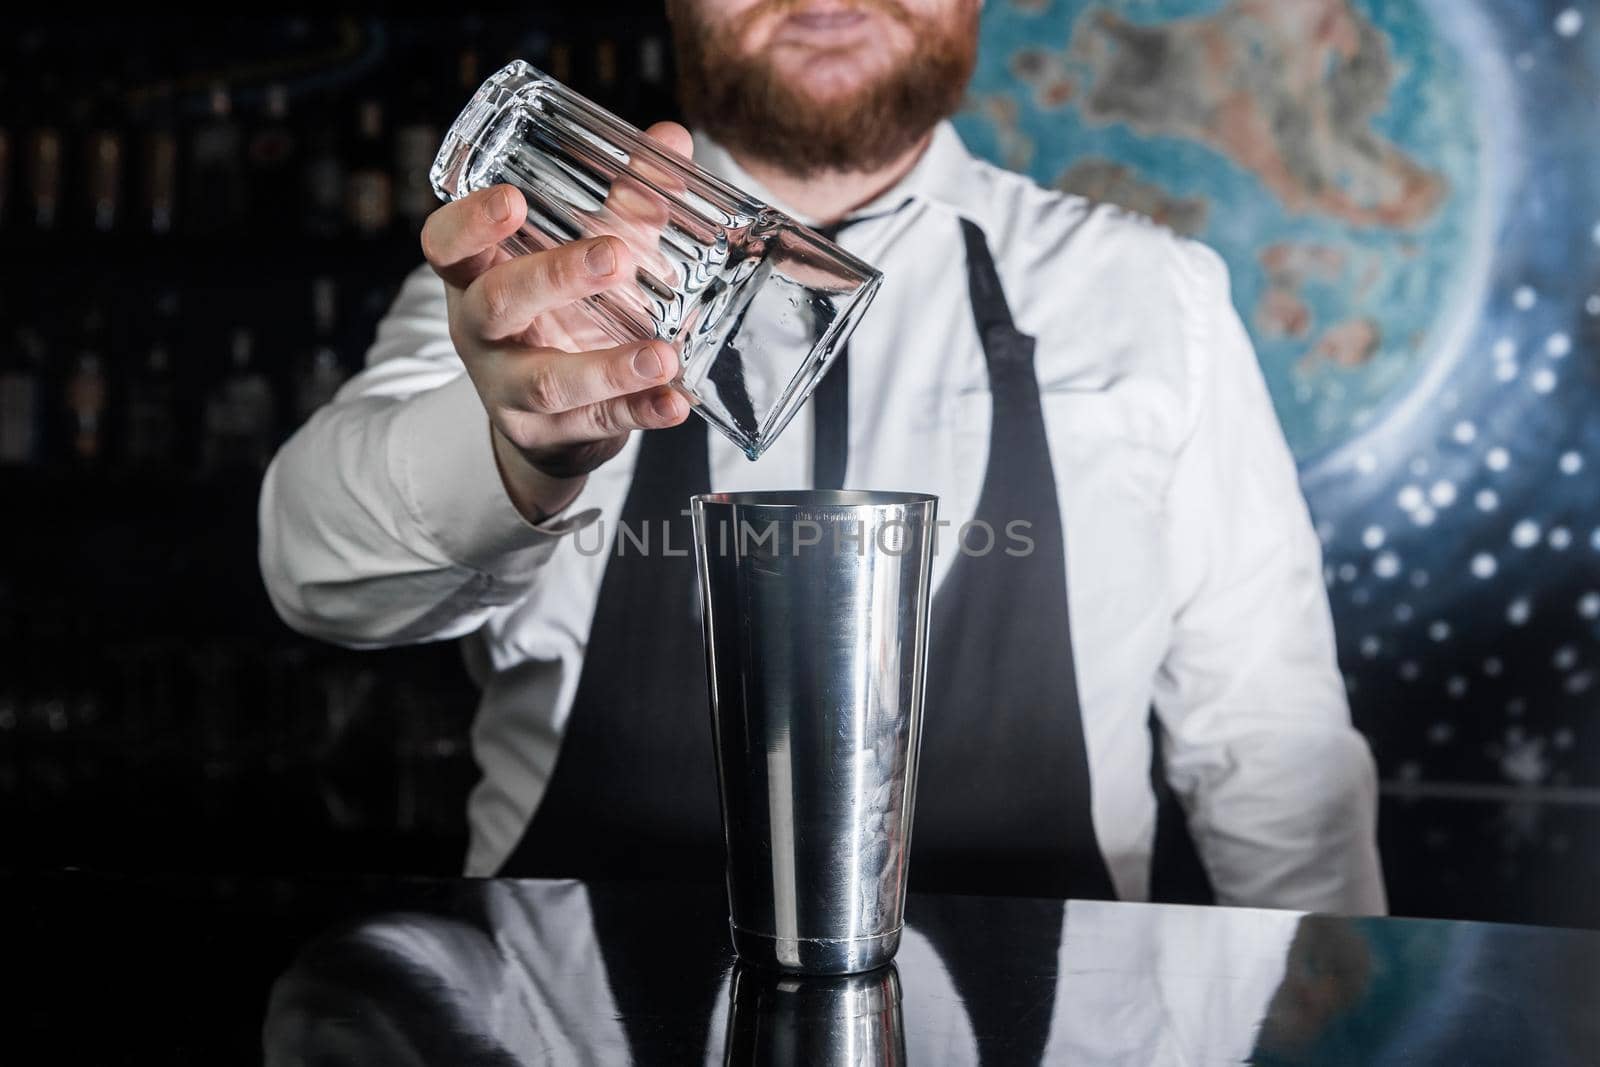 Professional Bartender Hand Covers Glass Glass Tool for Mixing and Making Alcoholic Cocktails Metal Shaker.